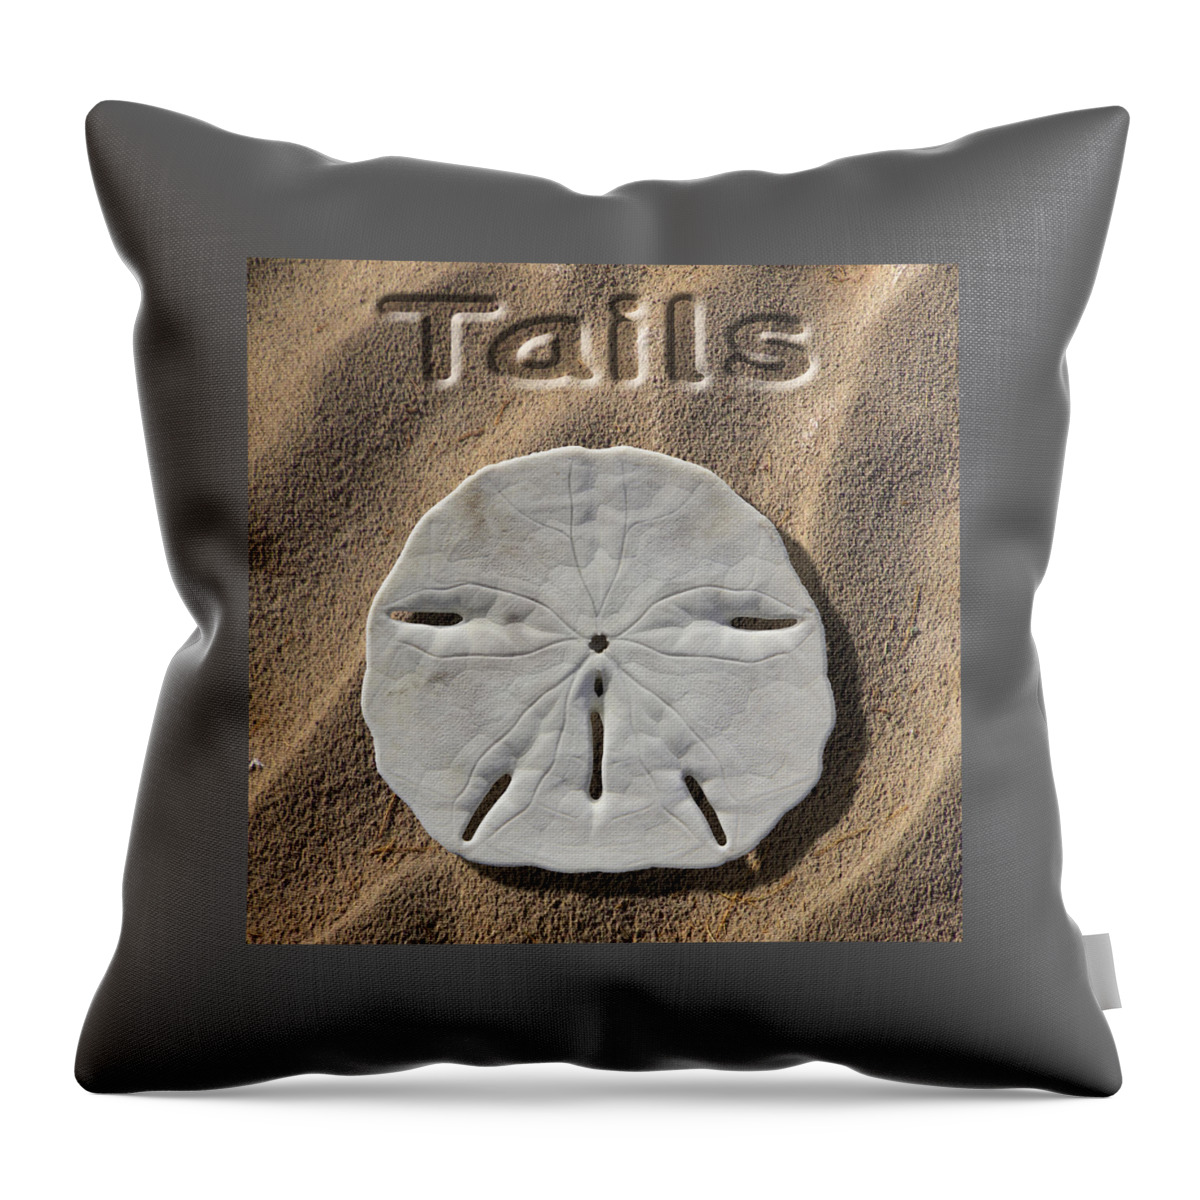 Sand Dollar Throw Pillow featuring the photograph Sand Dollar Tails by Mike McGlothlen